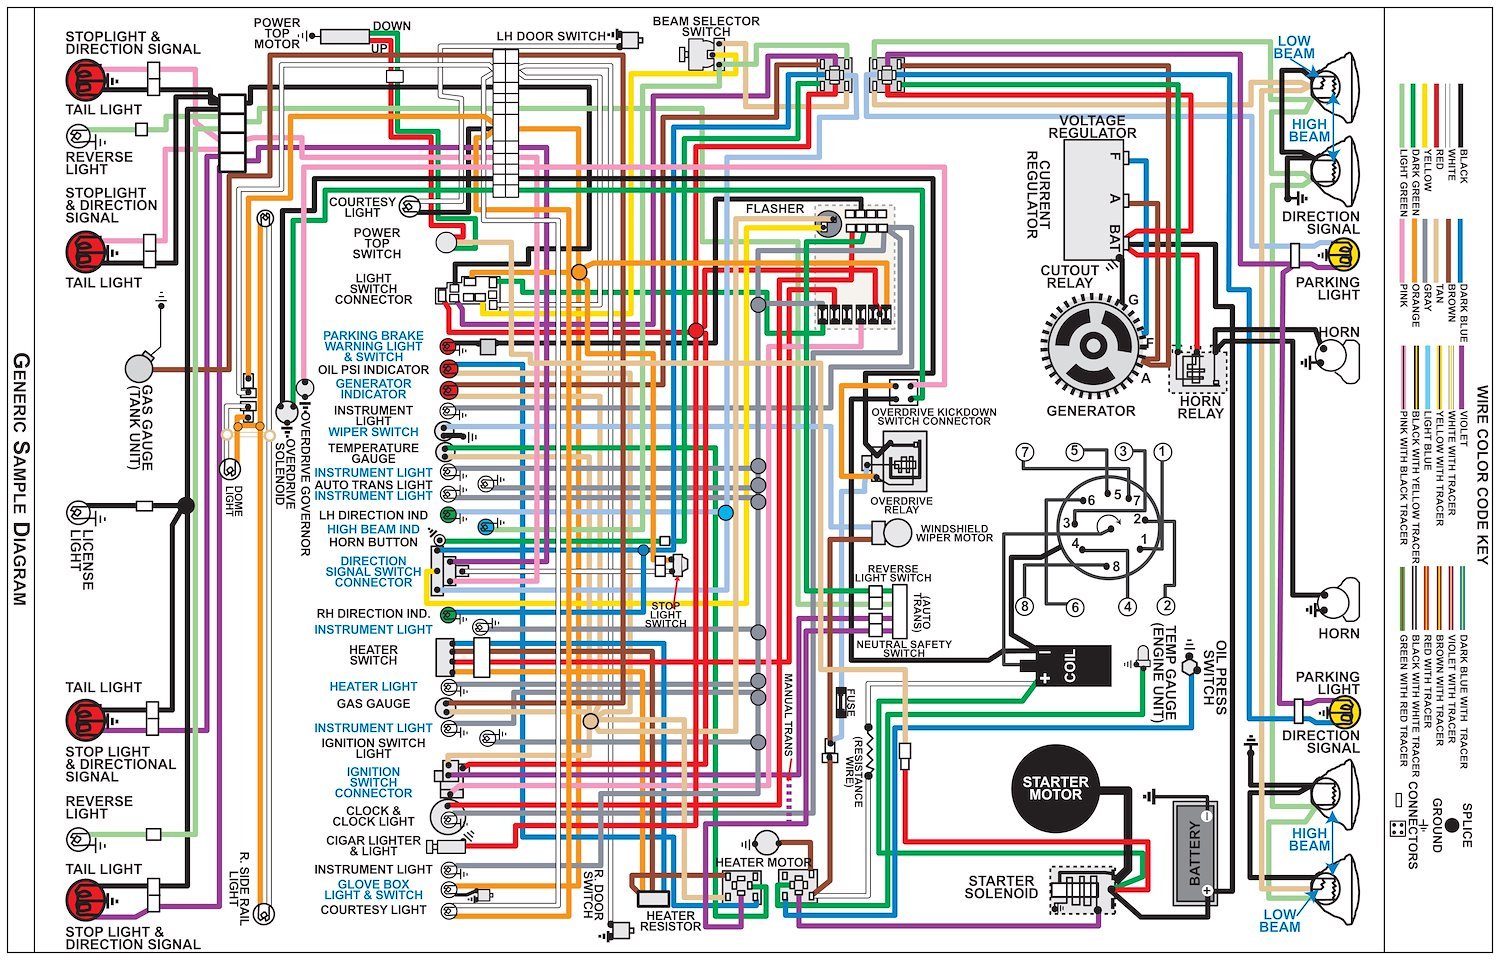 Wiring Diagram for 1971 Dodge Challenger with HEMI Engine, 11 in x 17 in., Laminated